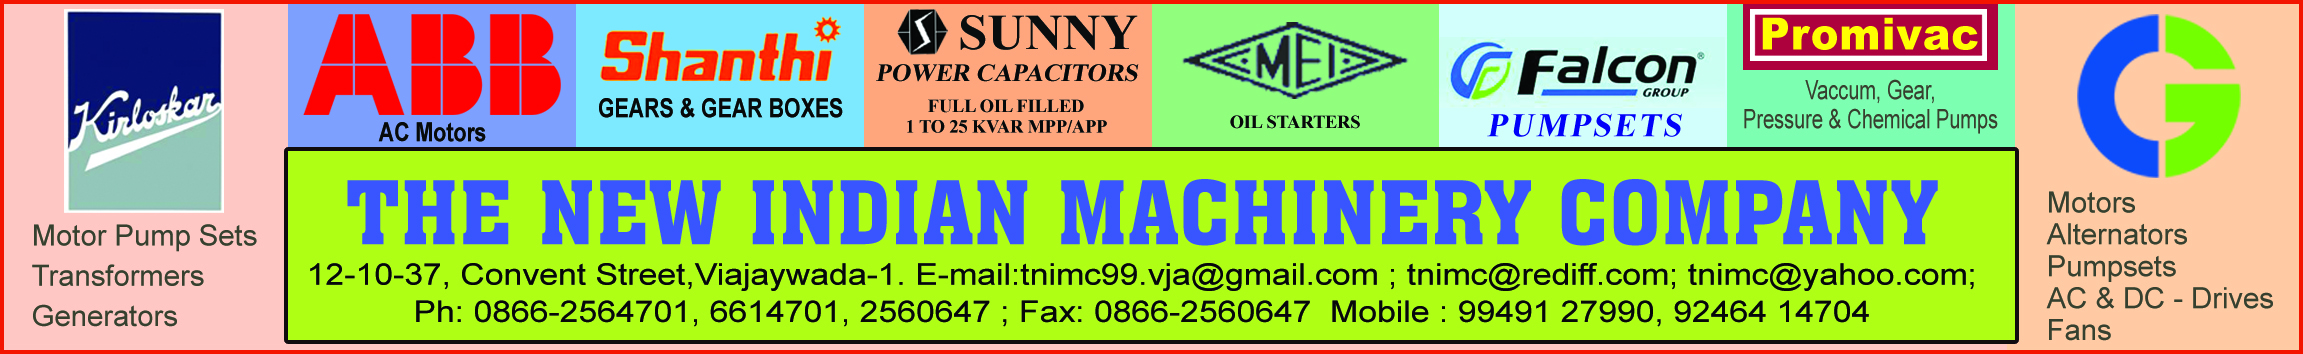 THE NEW INDIAN MACHINERY COMPANY